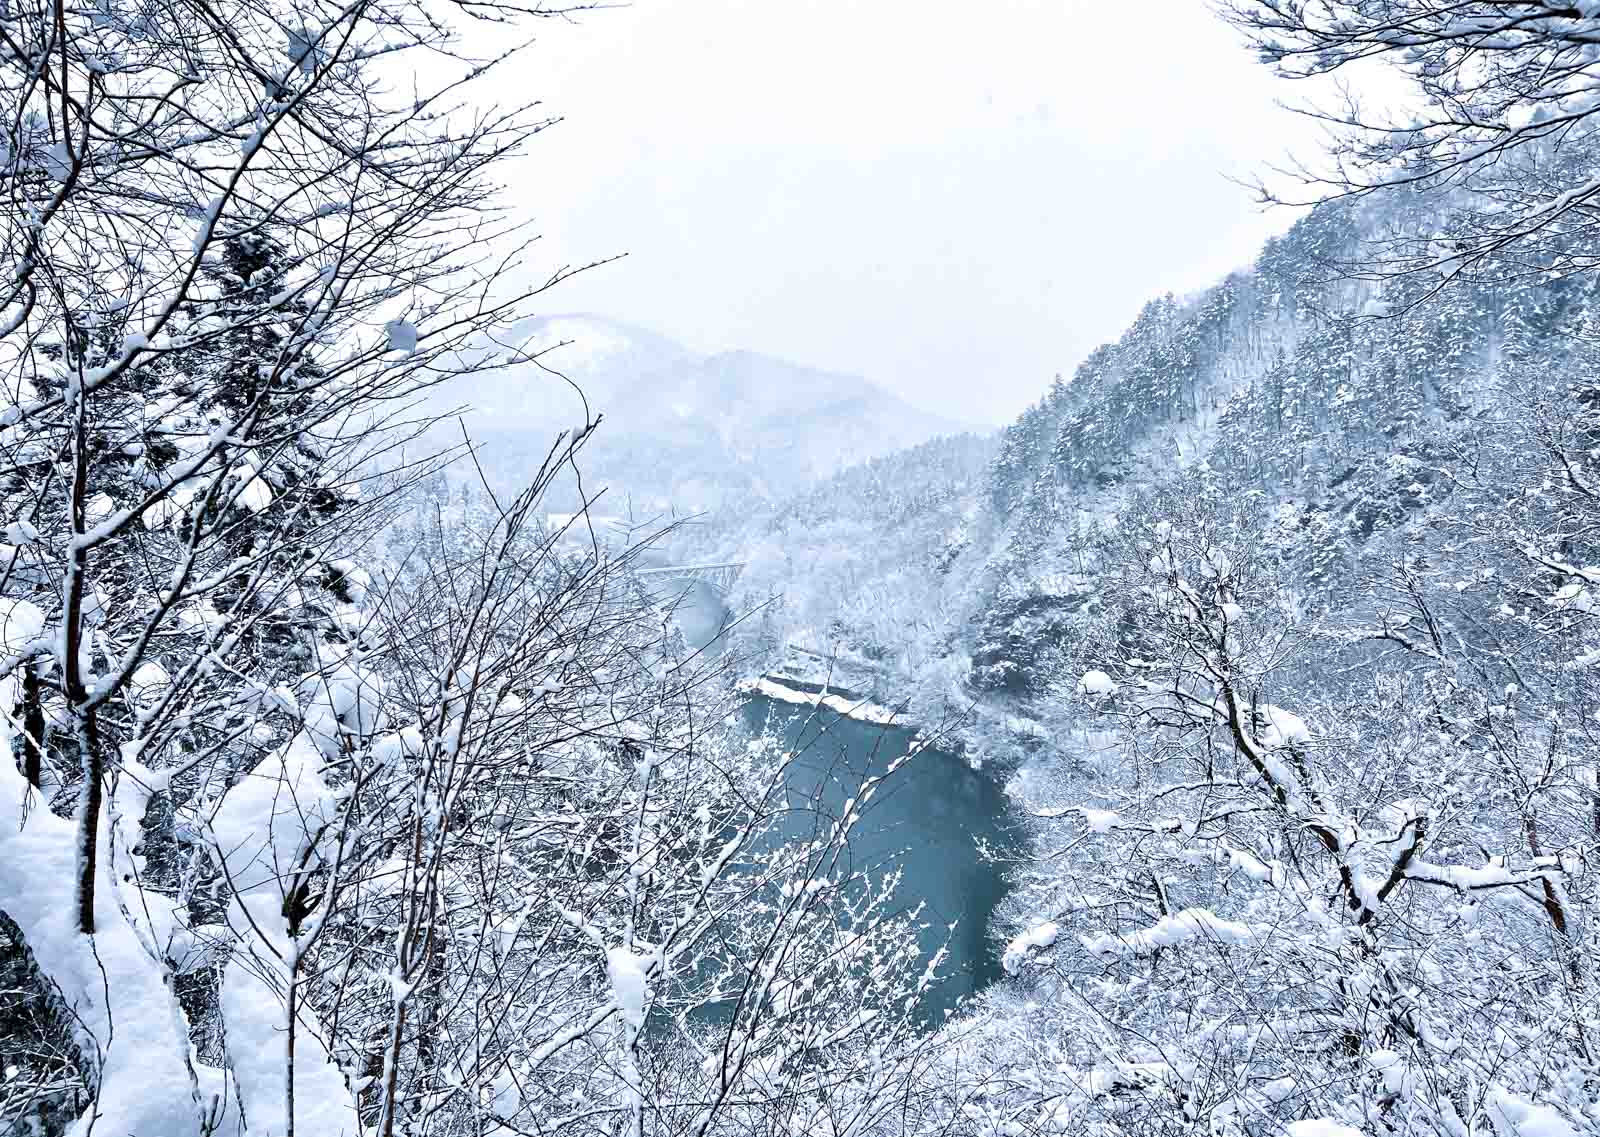 A Romantic Train Ride Through Mountains, Bridges and a Cliffside Temple in Fukushima